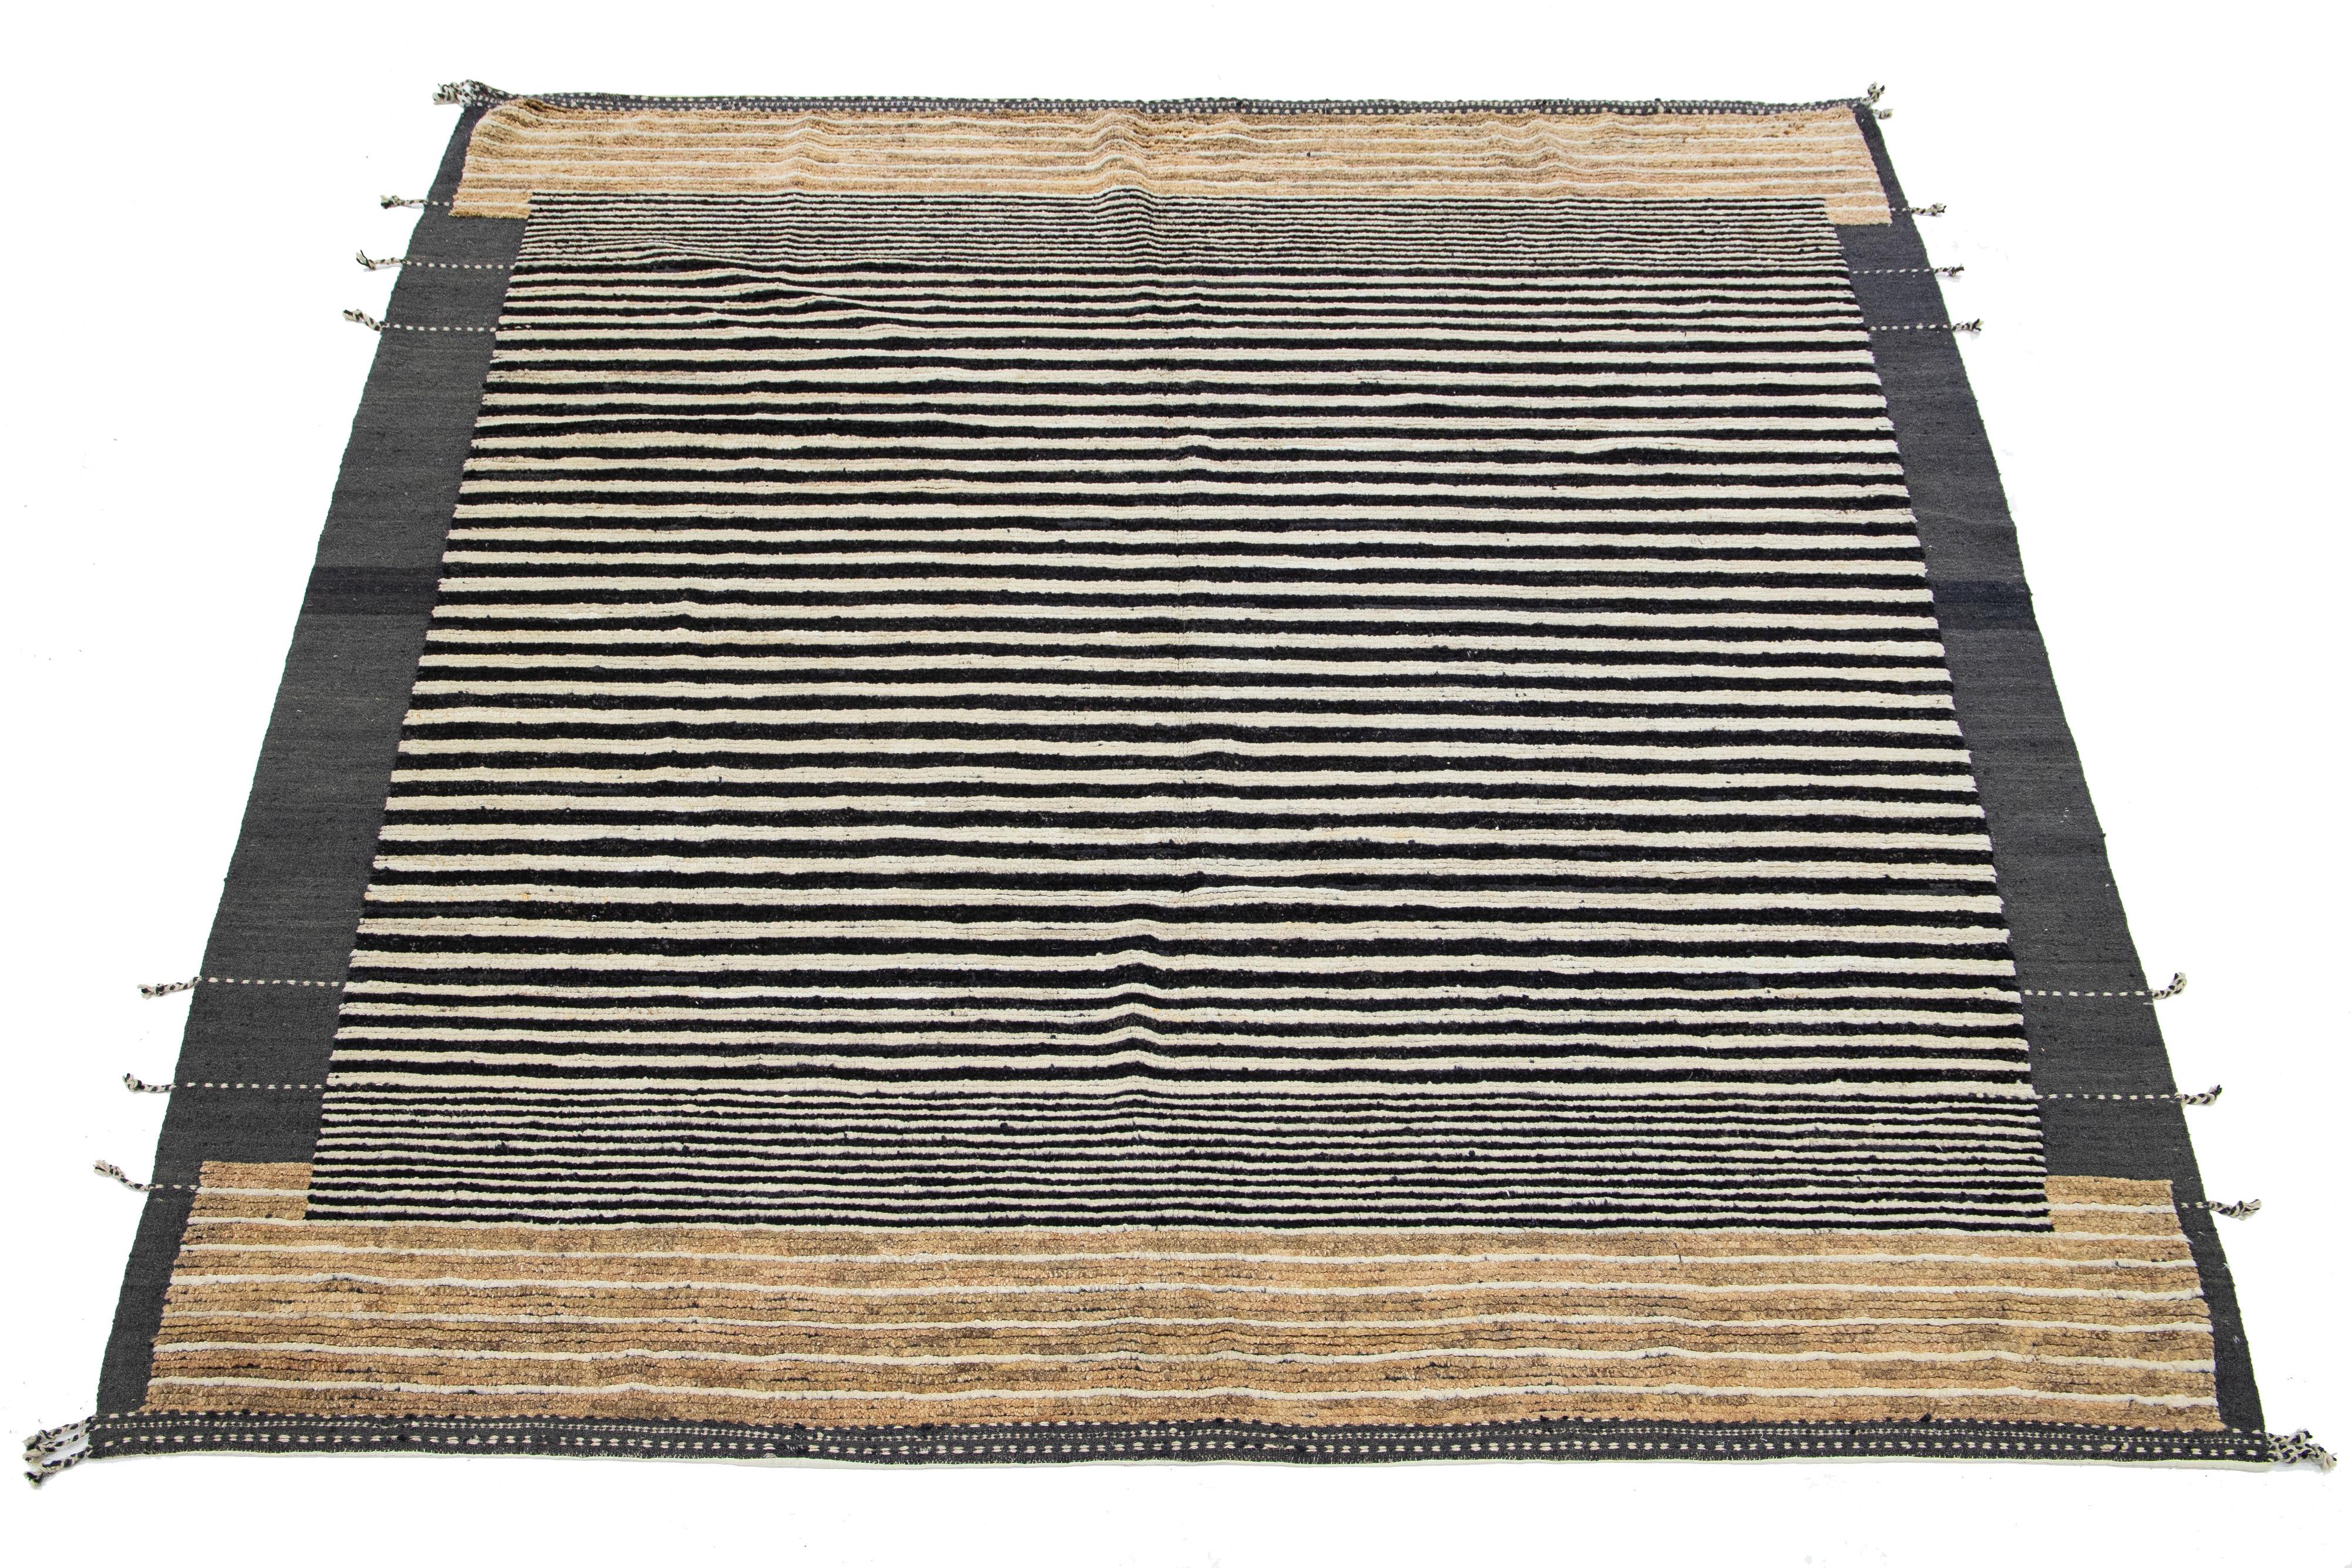 This room-size wool rug, expertly hand-knotted, showcases a Moroccan design. It exudes a contemporary appeal infused with a hint of retro styling, using an elegant mix of gray, black, and brown colors against an entrancing beige background.

This